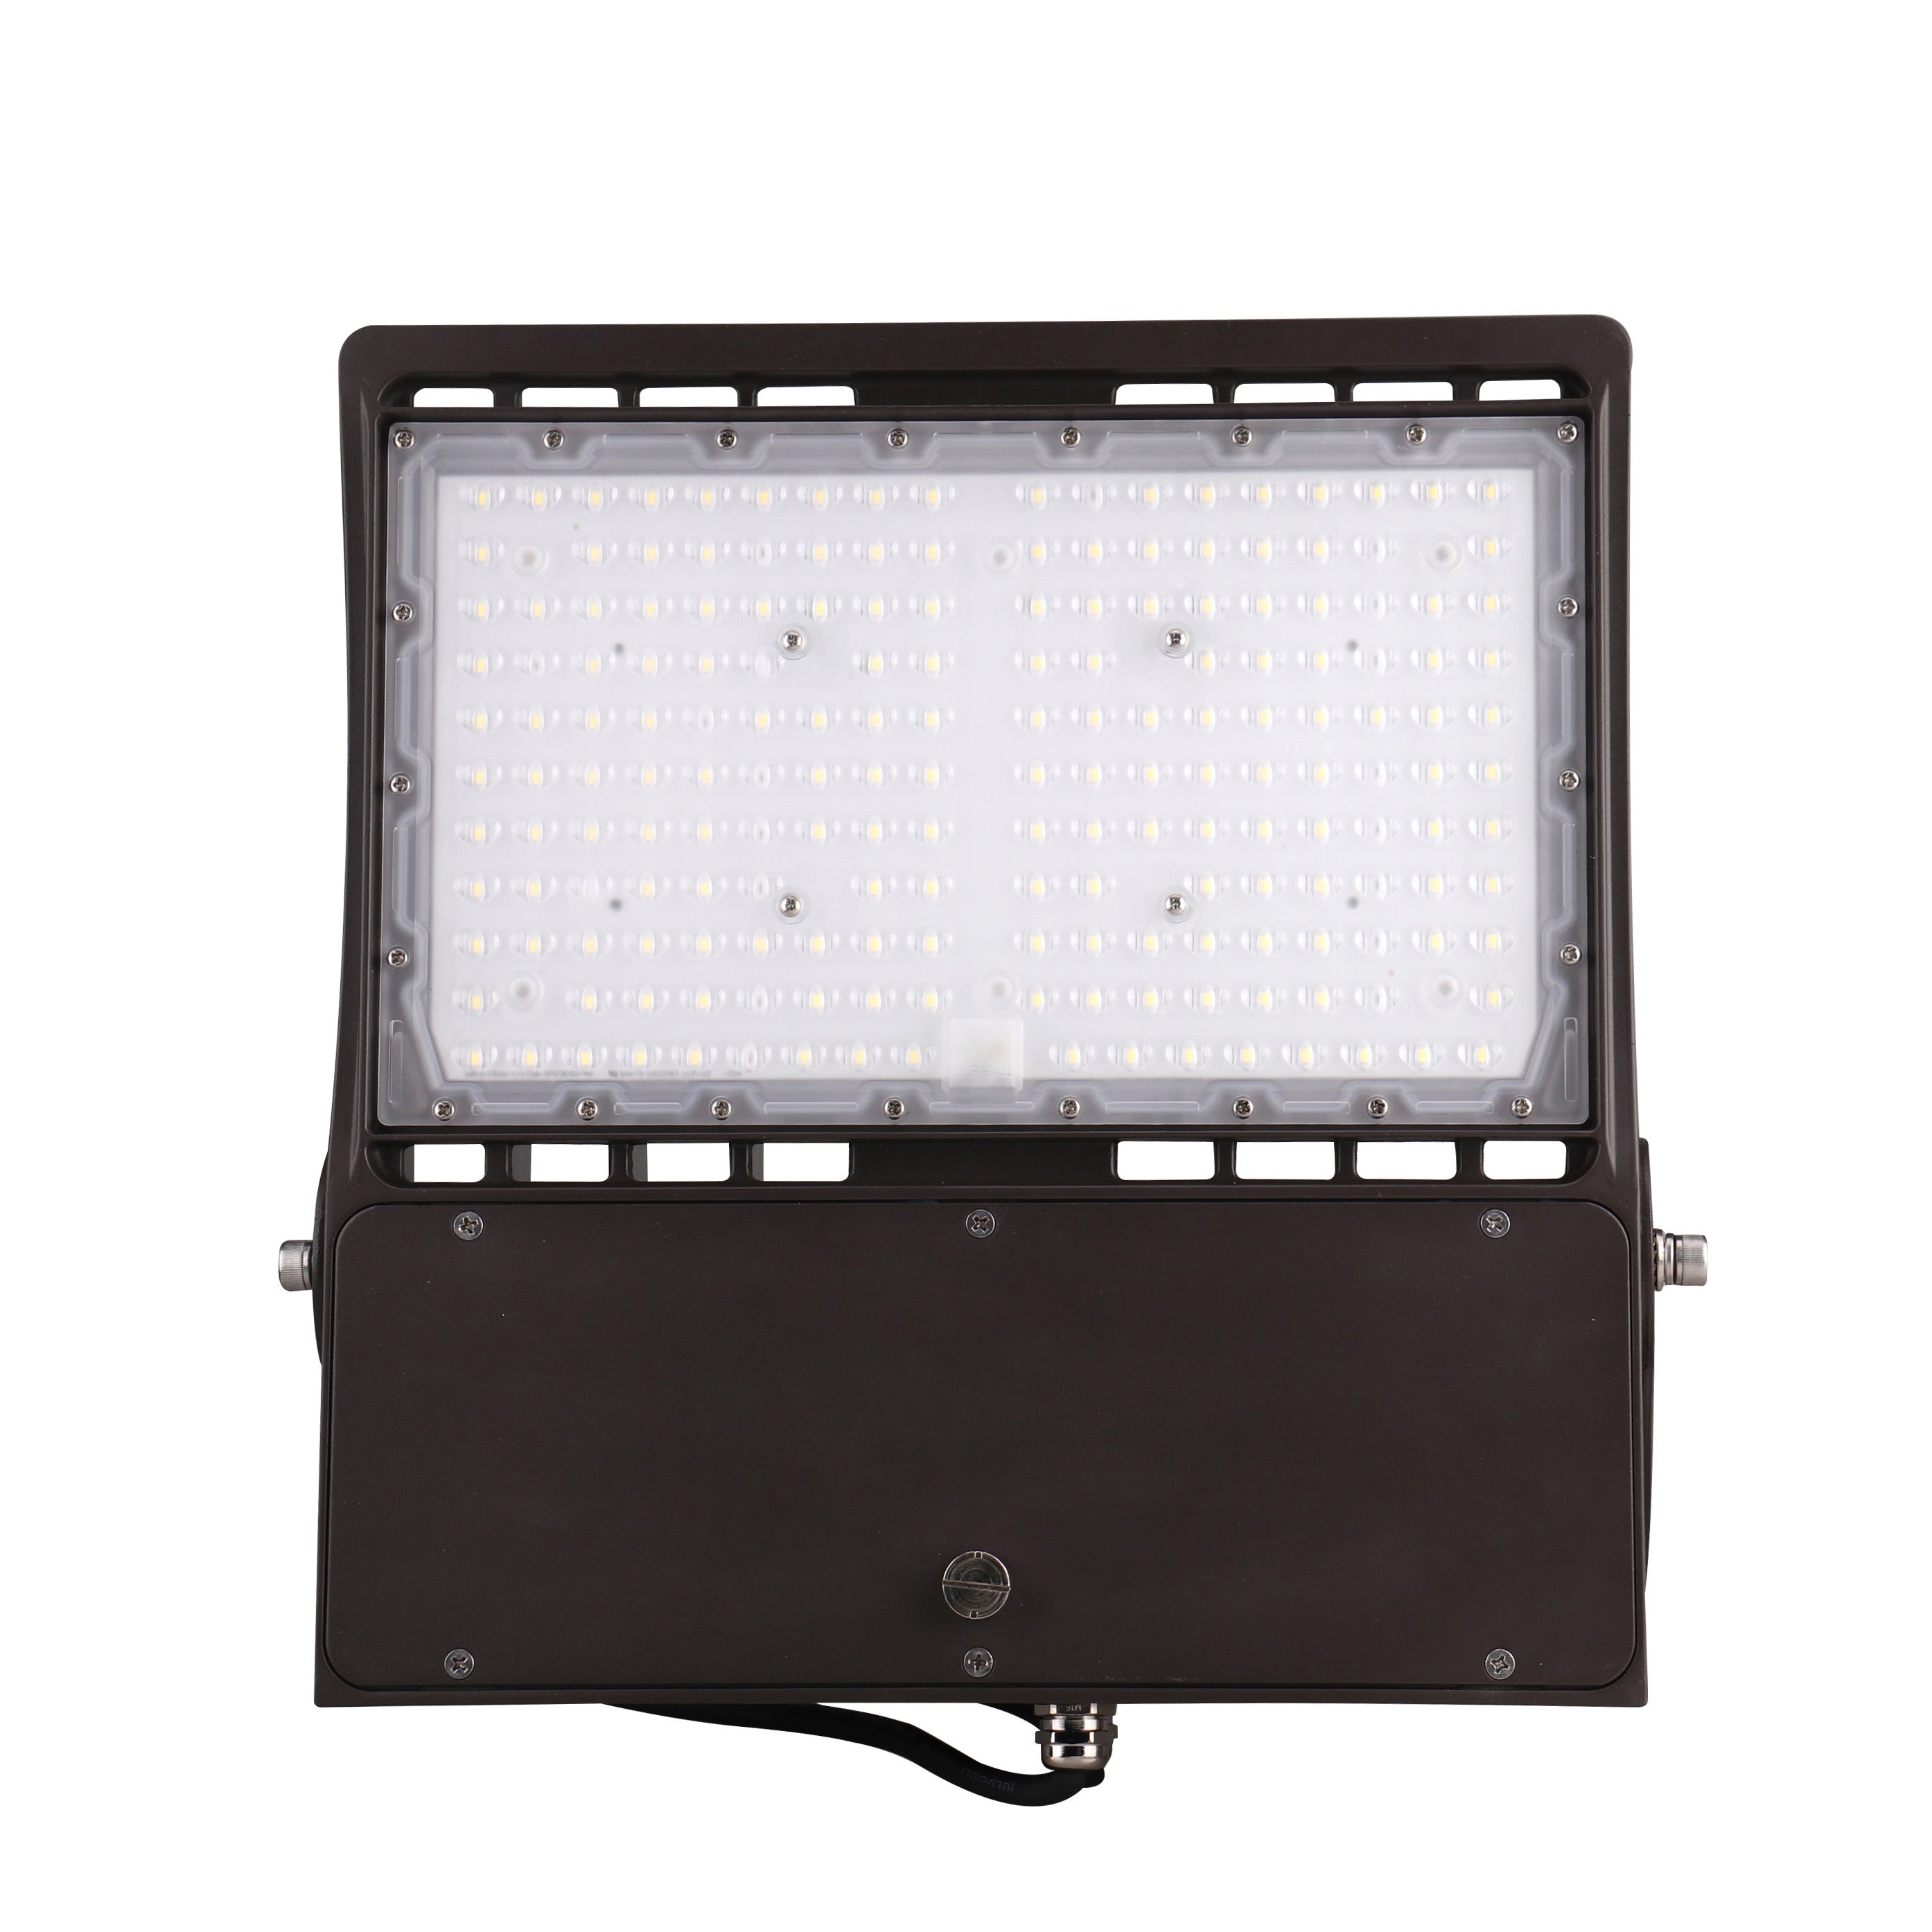 100W LED Flood Light Outdoor, 5700K, 14000LM, AC100-277V, Dimmable, UL DLC Listed, Bronze, Security Lights, IP65 Waterproof, Outdoor Floodlights for Yard, Garden, Playground, Basketball Court